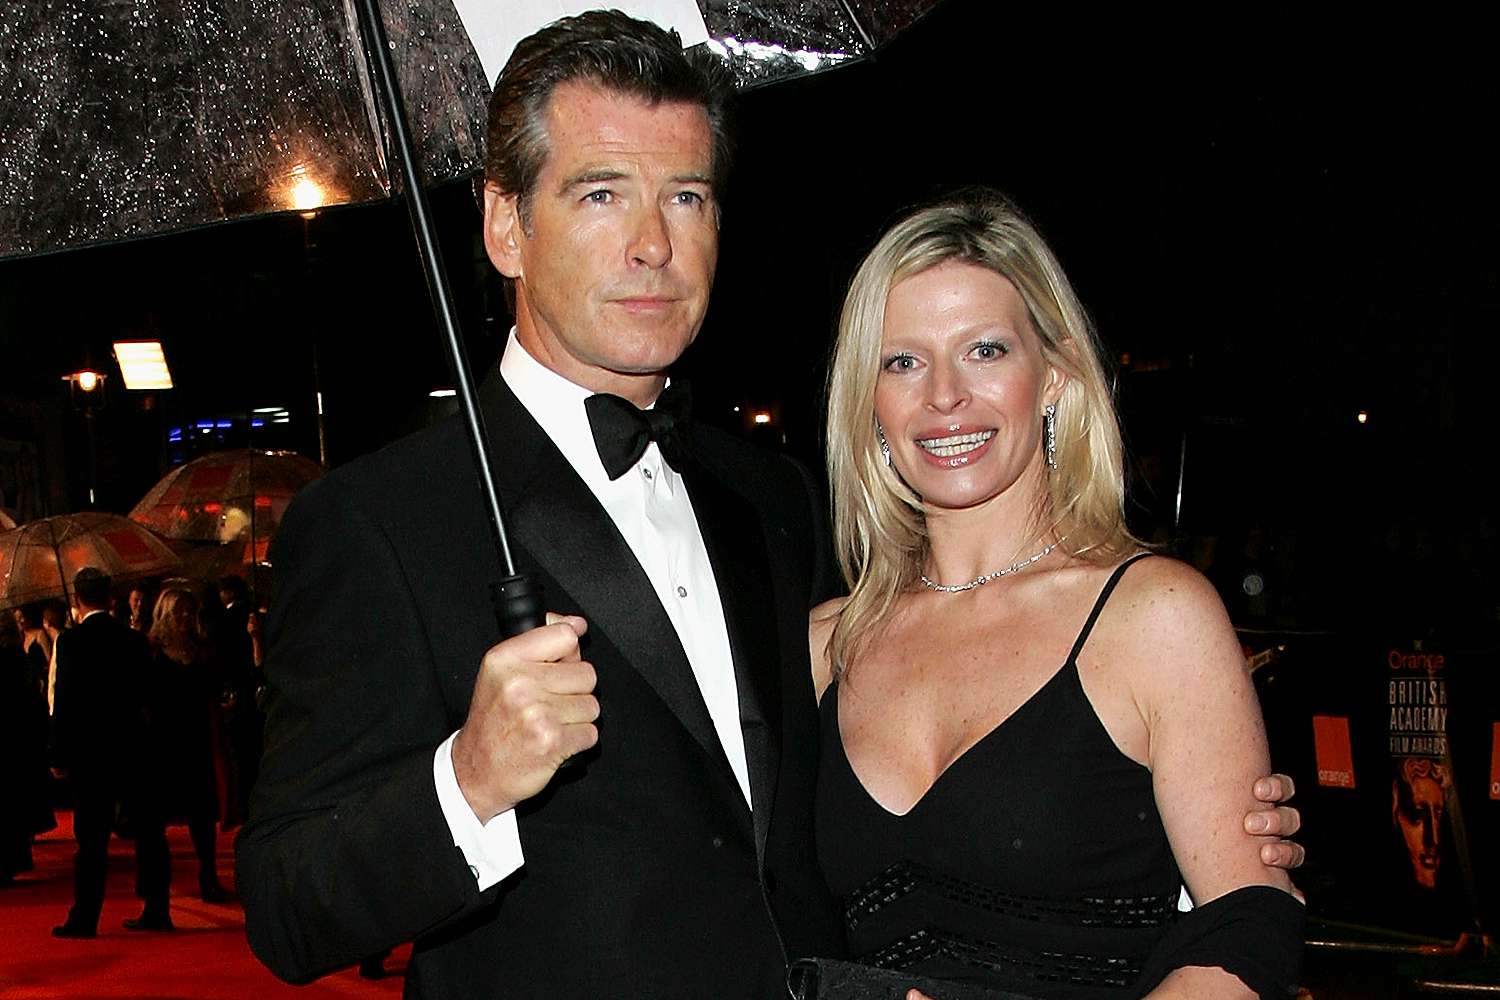 Dating pierce brosnan Who is